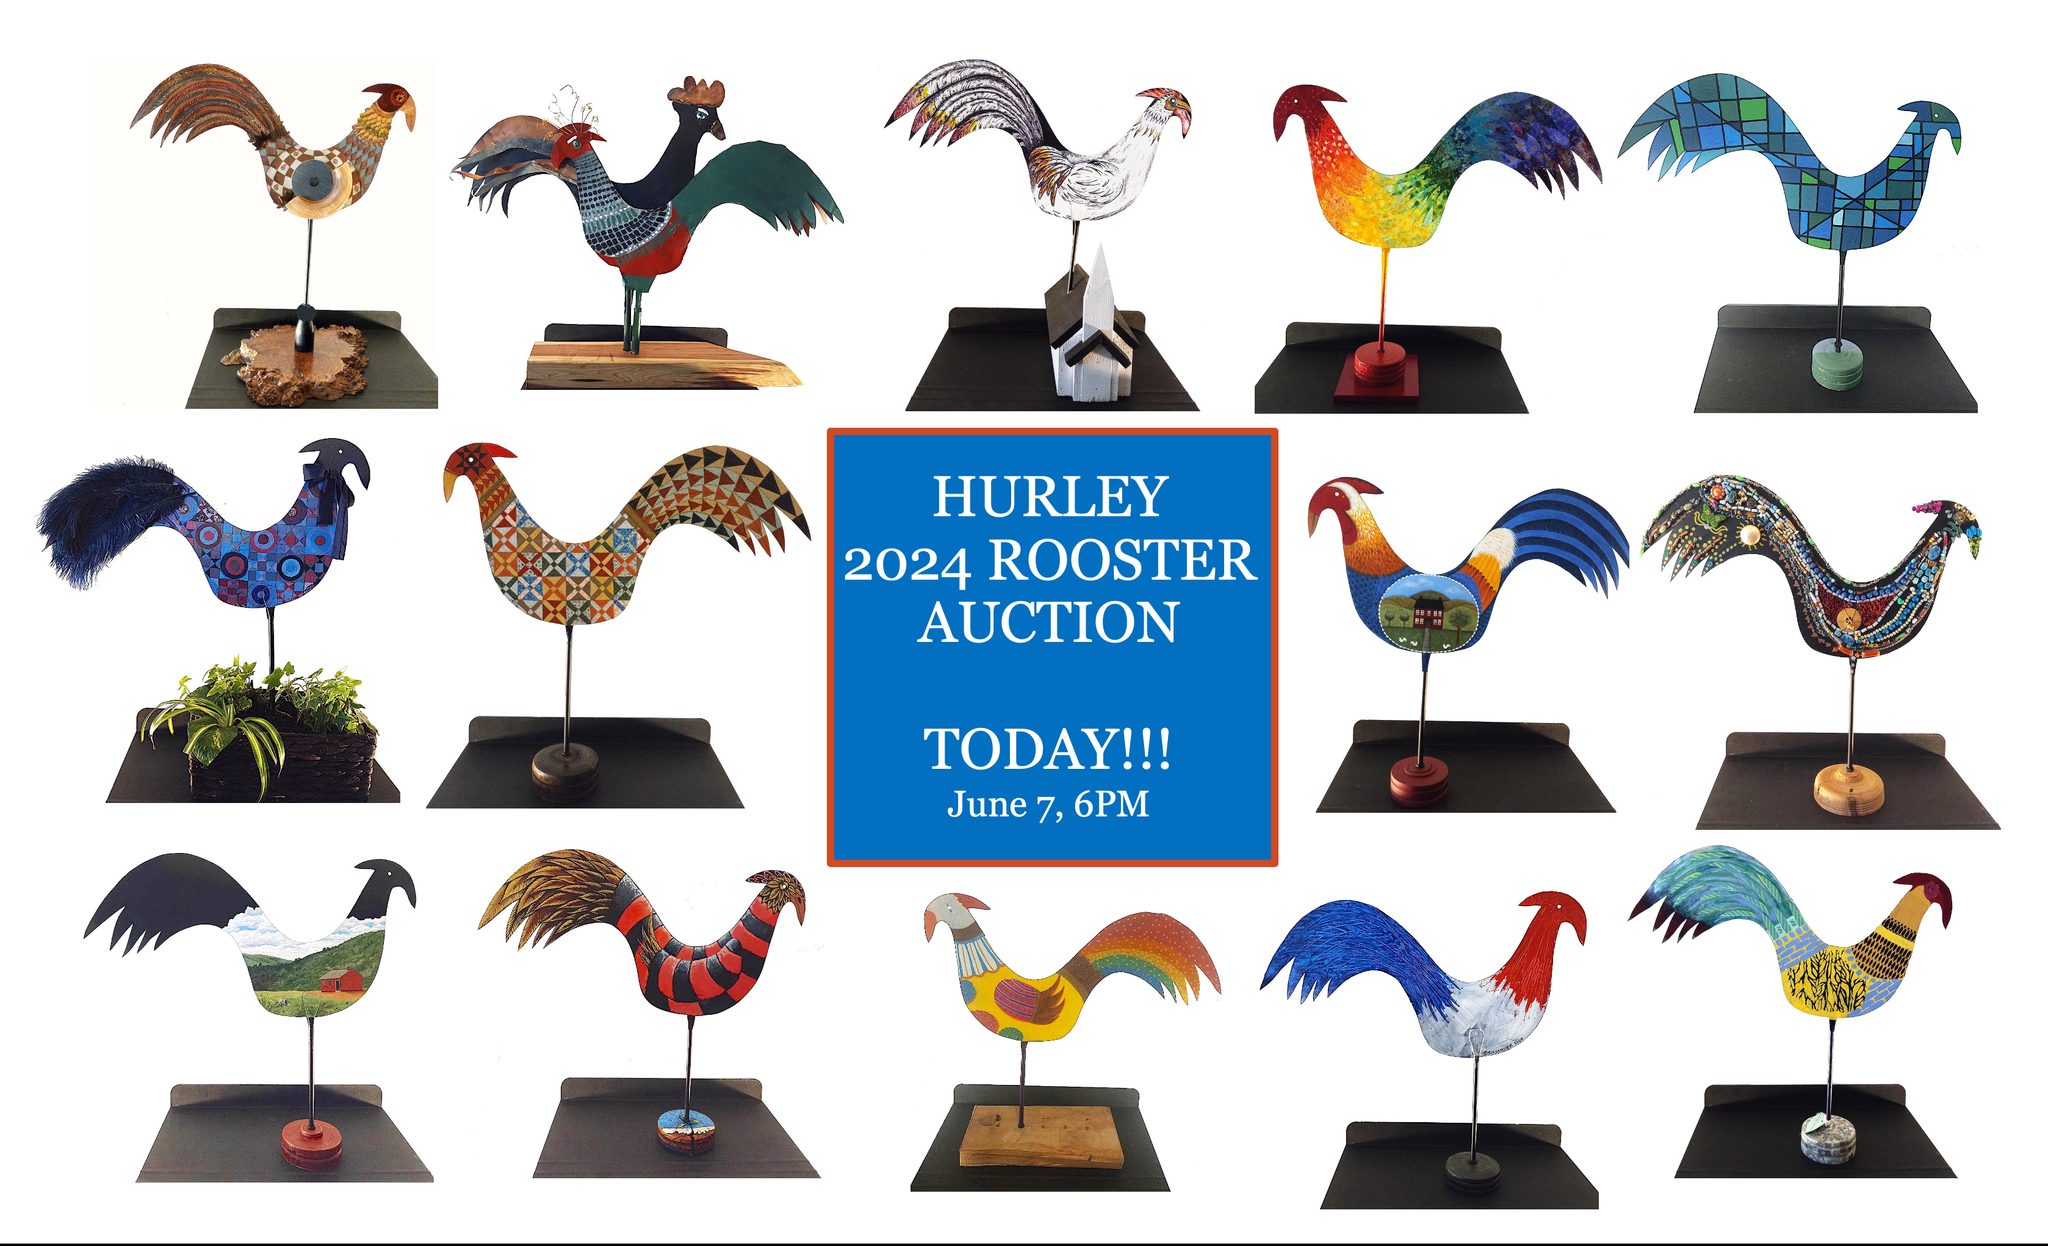 HURLEY ROOSTER AUCTION